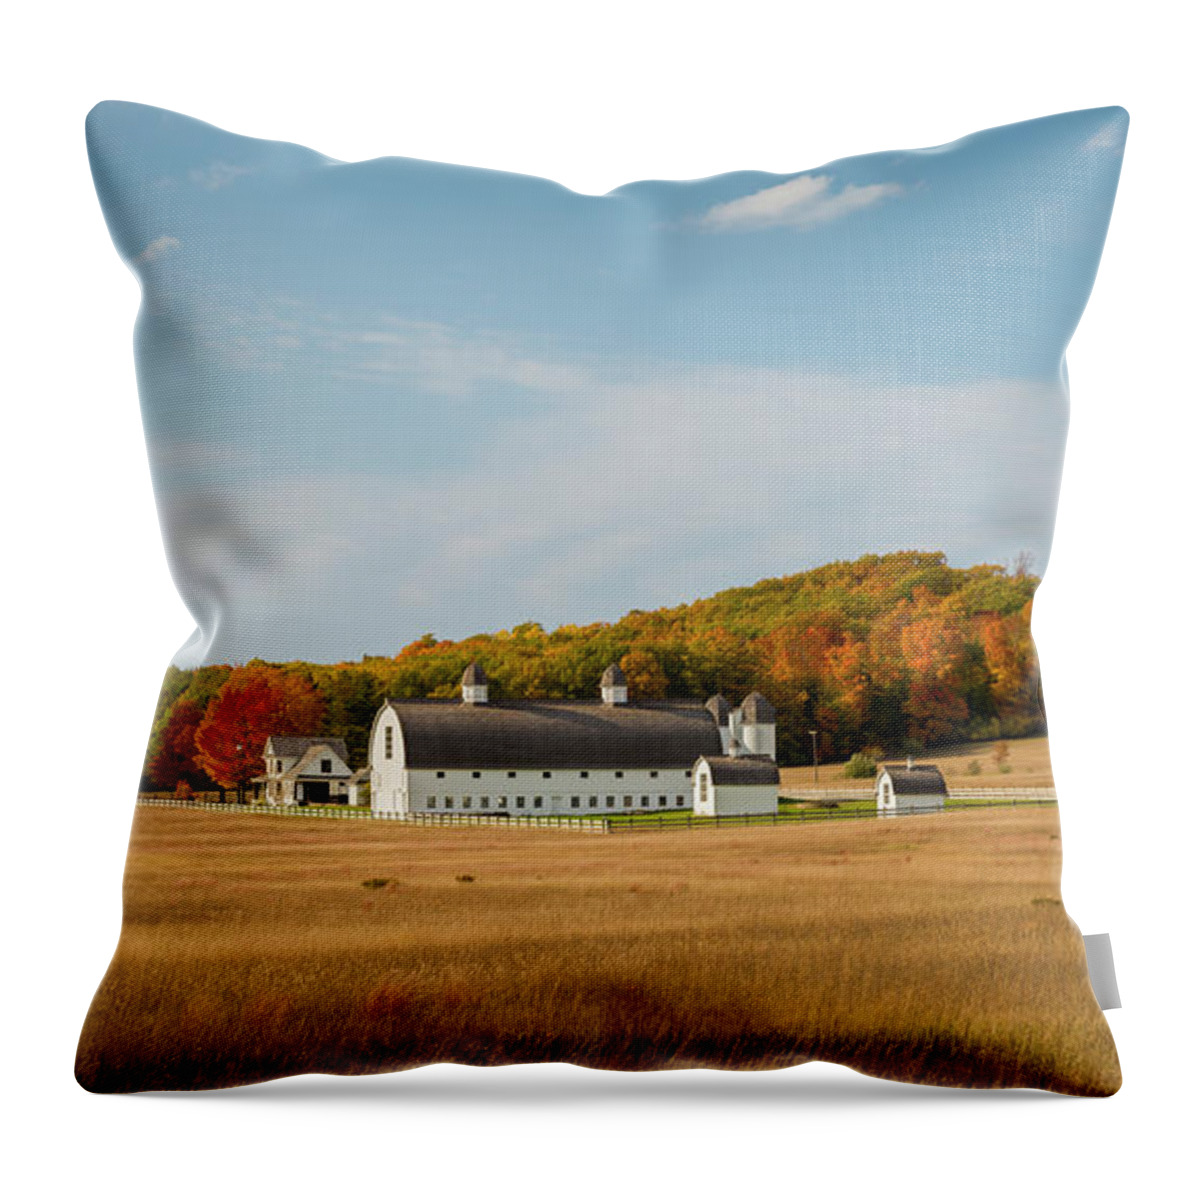 Dh Day Throw Pillow featuring the photograph Dh Day Farm by Steve L'Italien